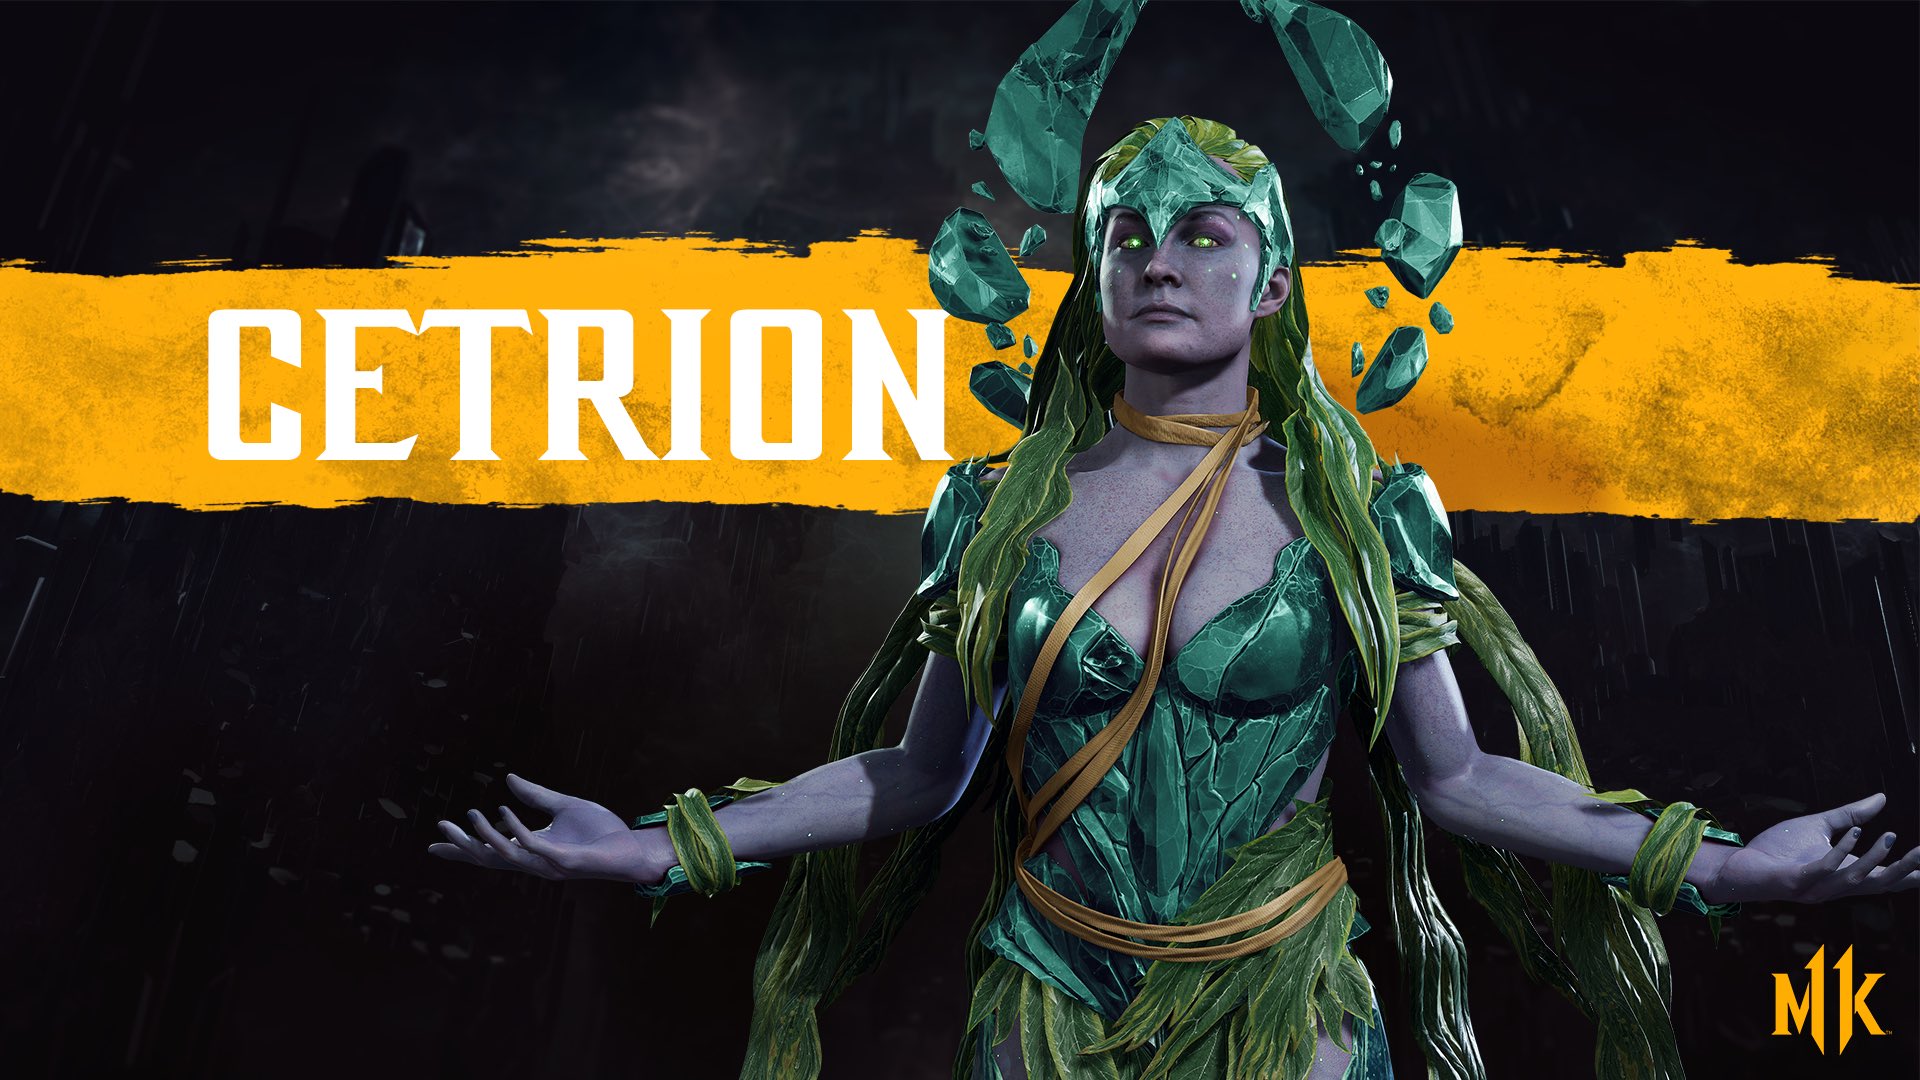 Cetrion is the brand new Mortal Kombat 11 character